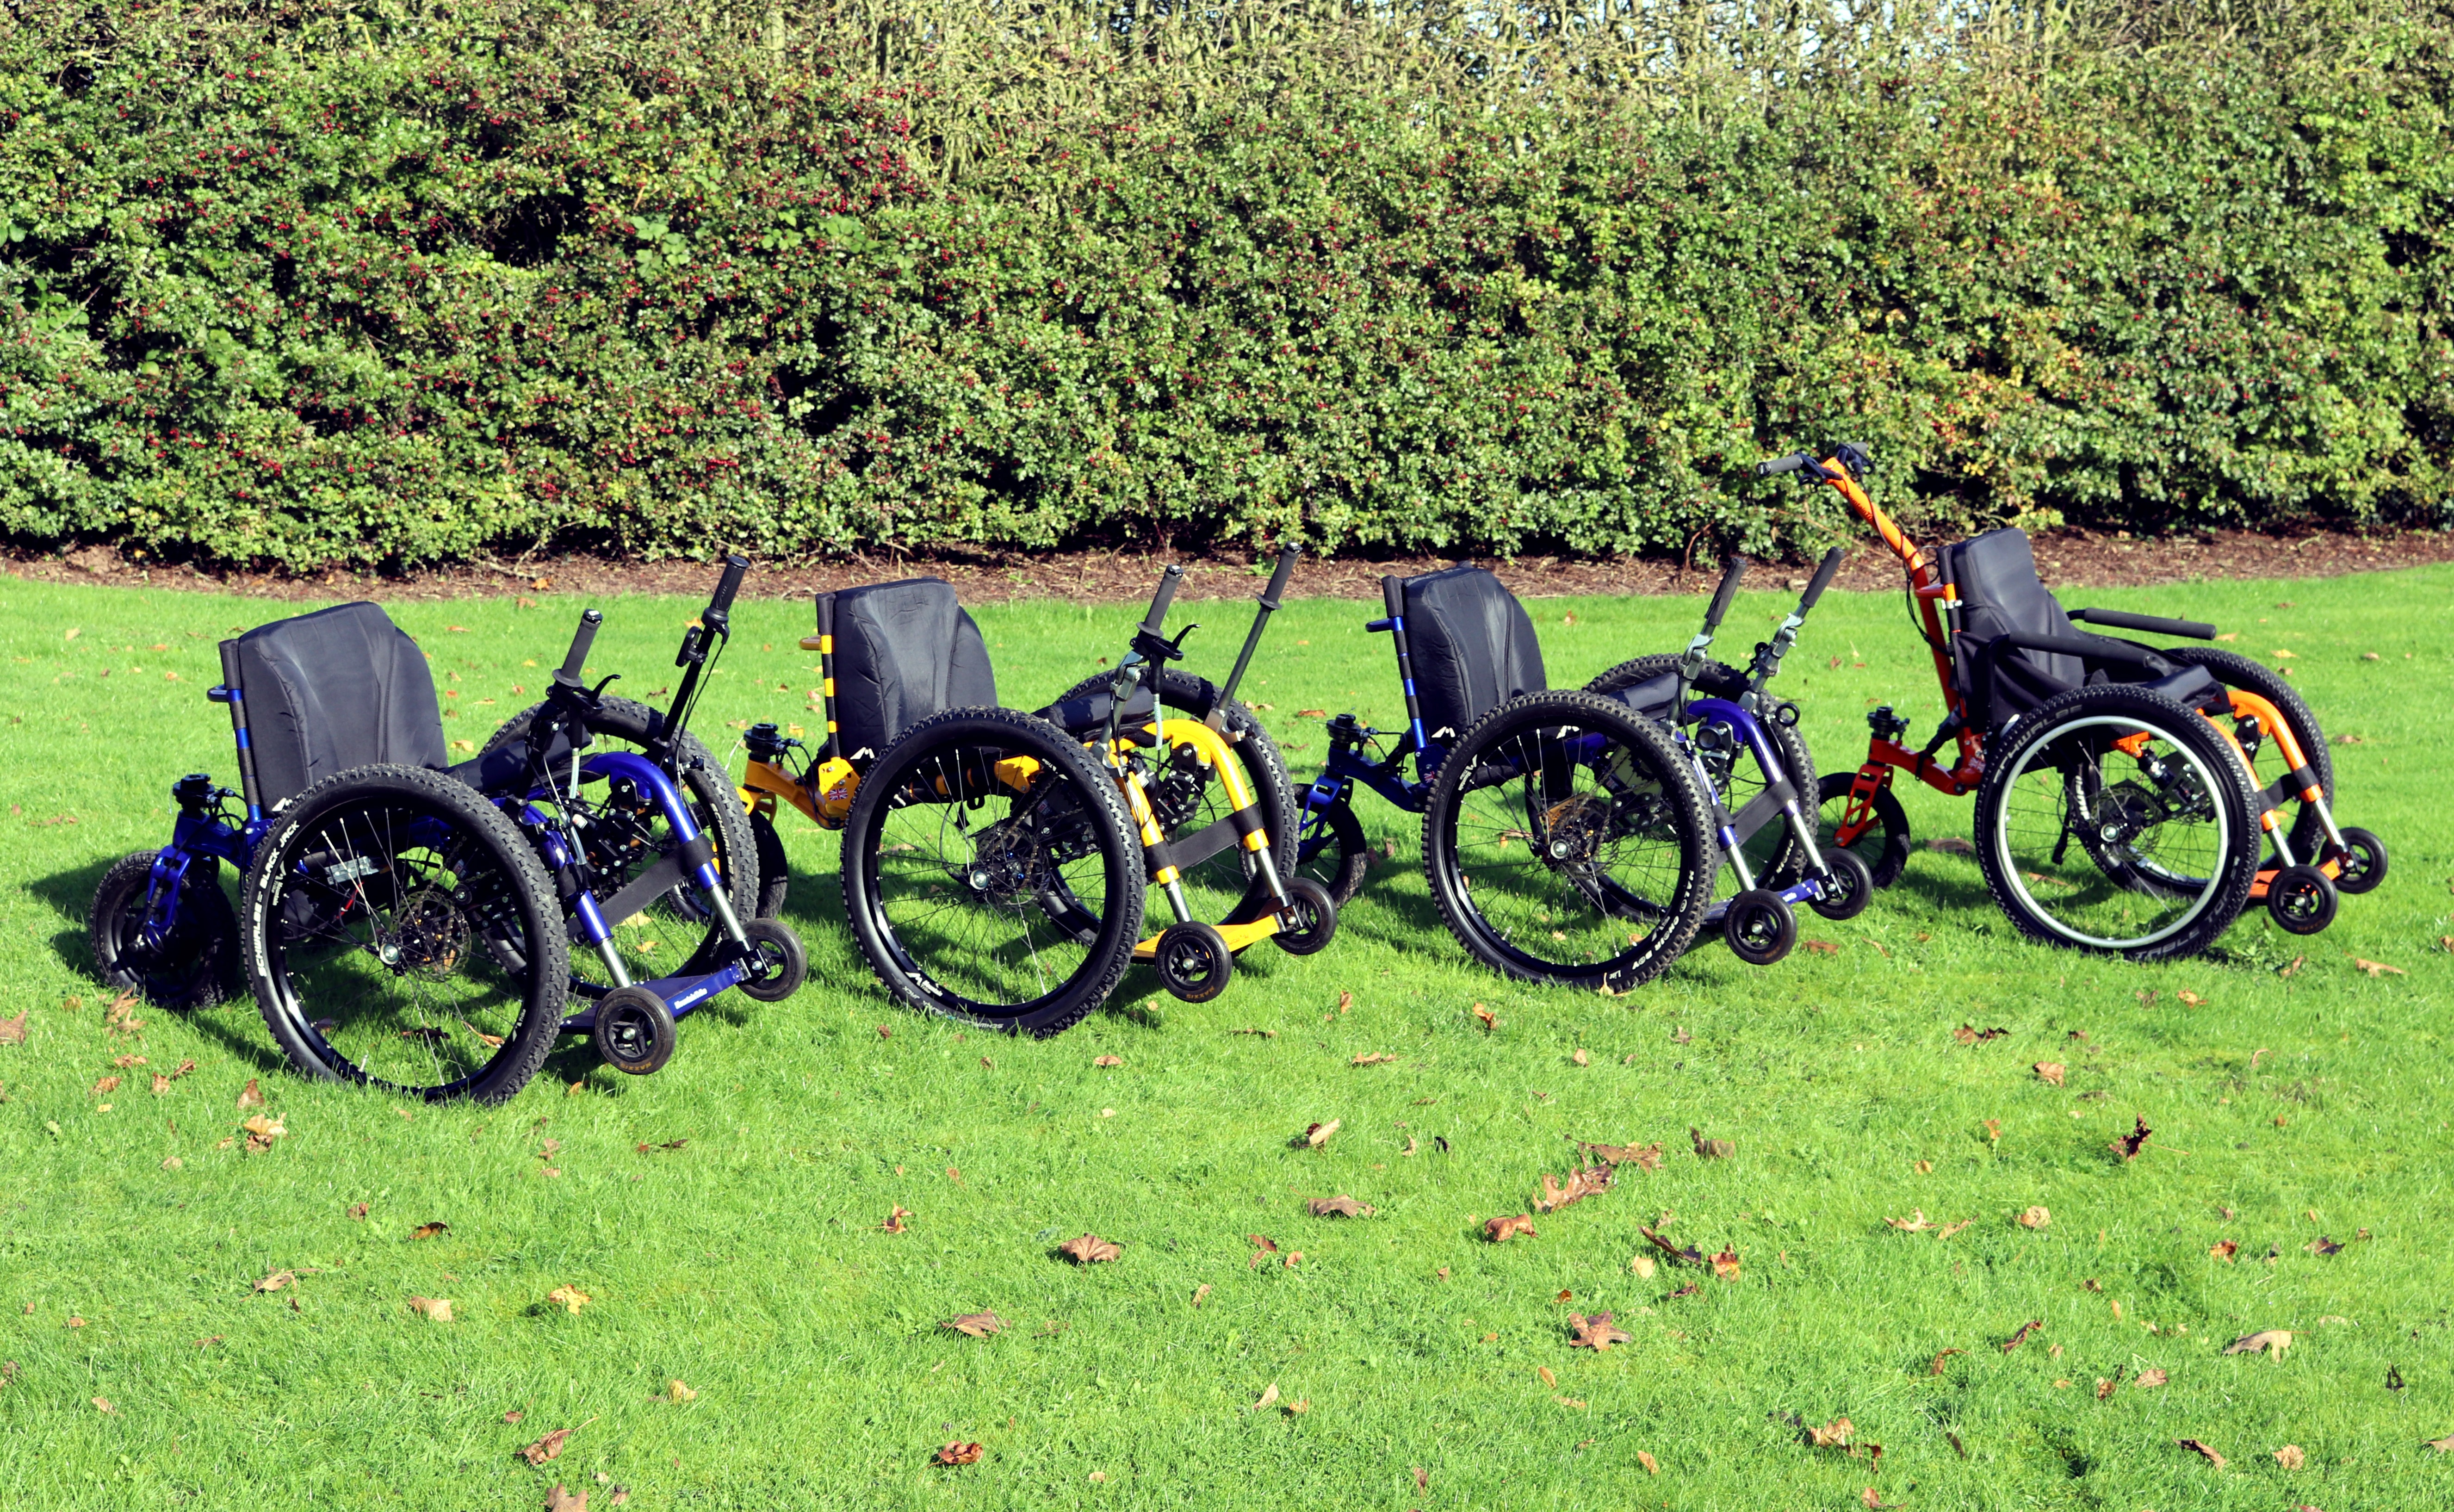 Finding the right all terrain, off-road wheelchair for you